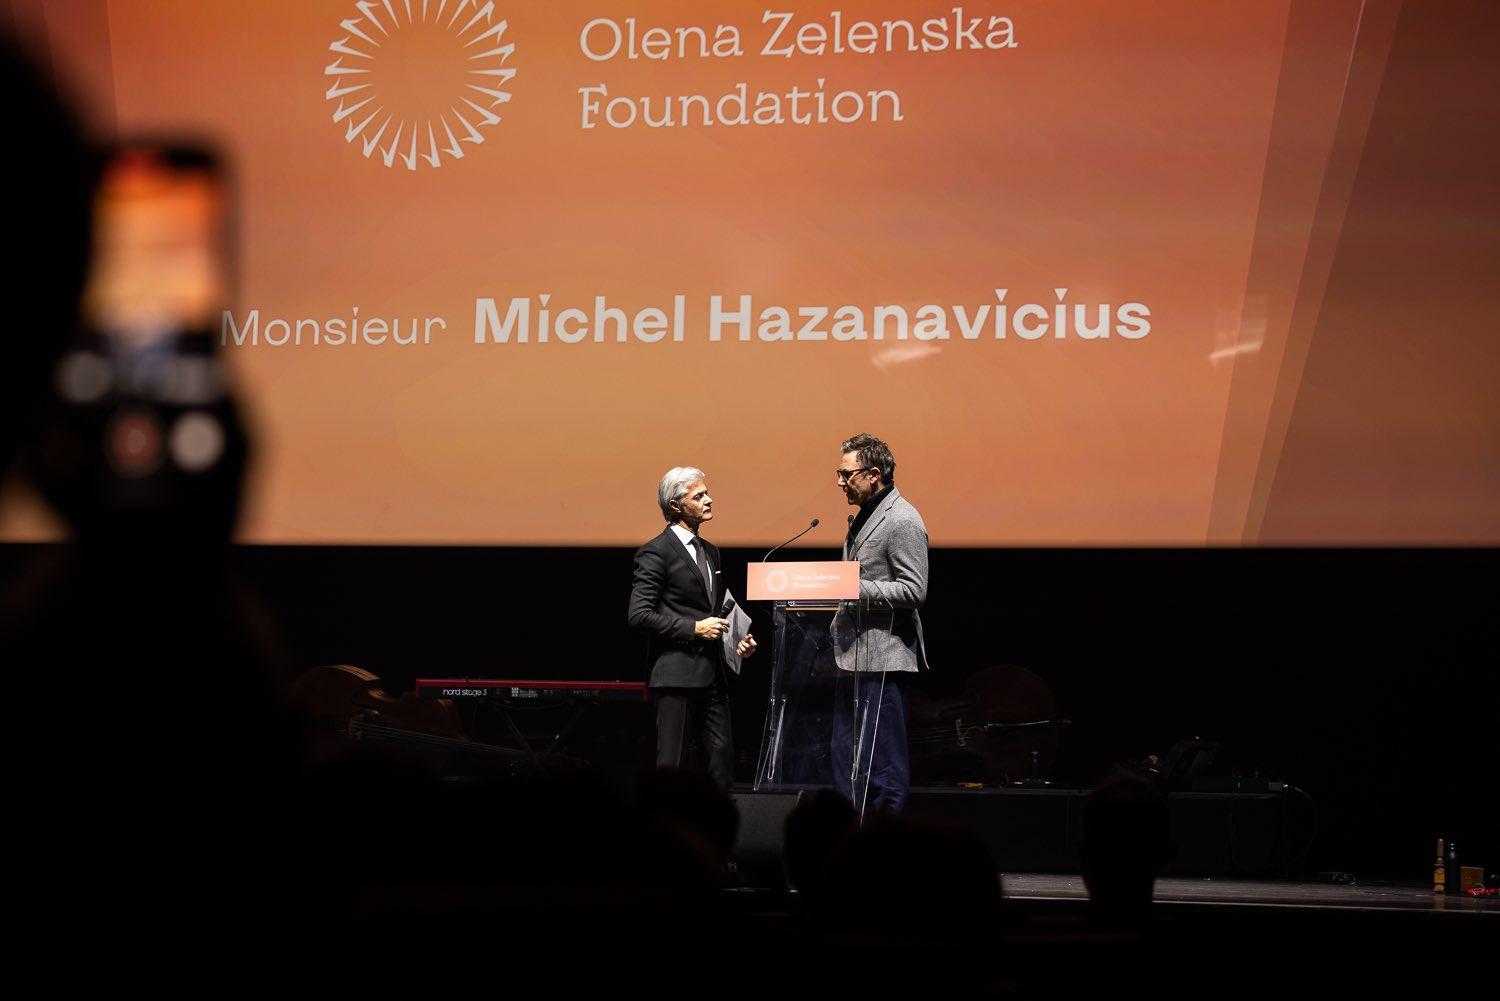 Michel Hazanavicius donated 125,000 euros for the reconstruction of the hospital in Izyum